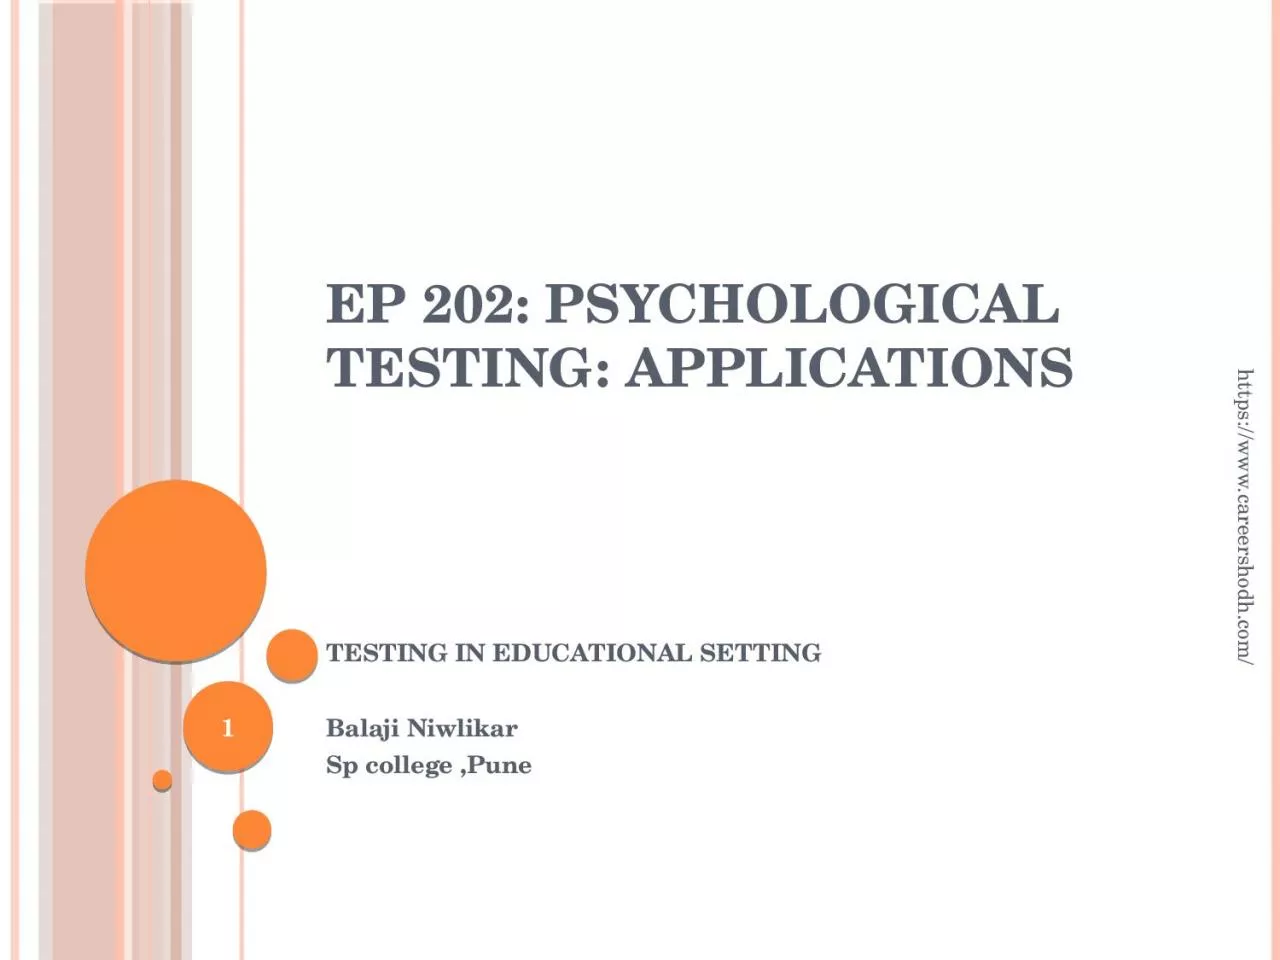 EP 202: PSYCHOLOGICAL TESTING: APPLICATIONS